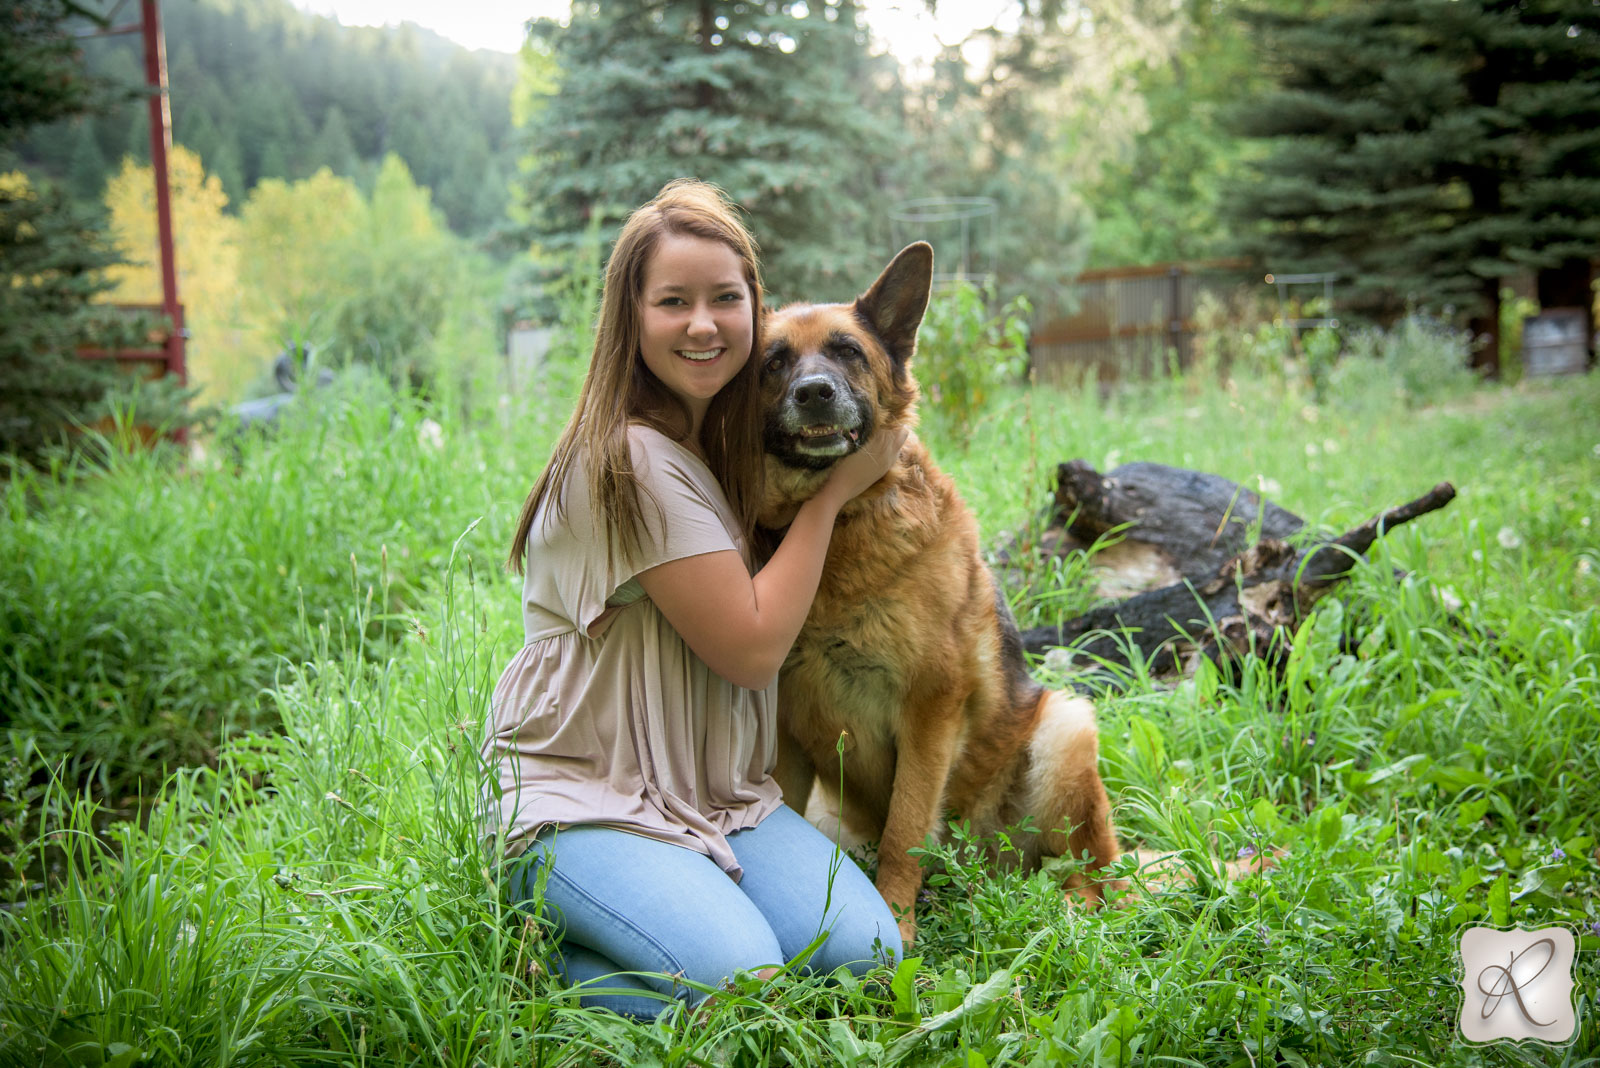 Senior Portraits with Dogs